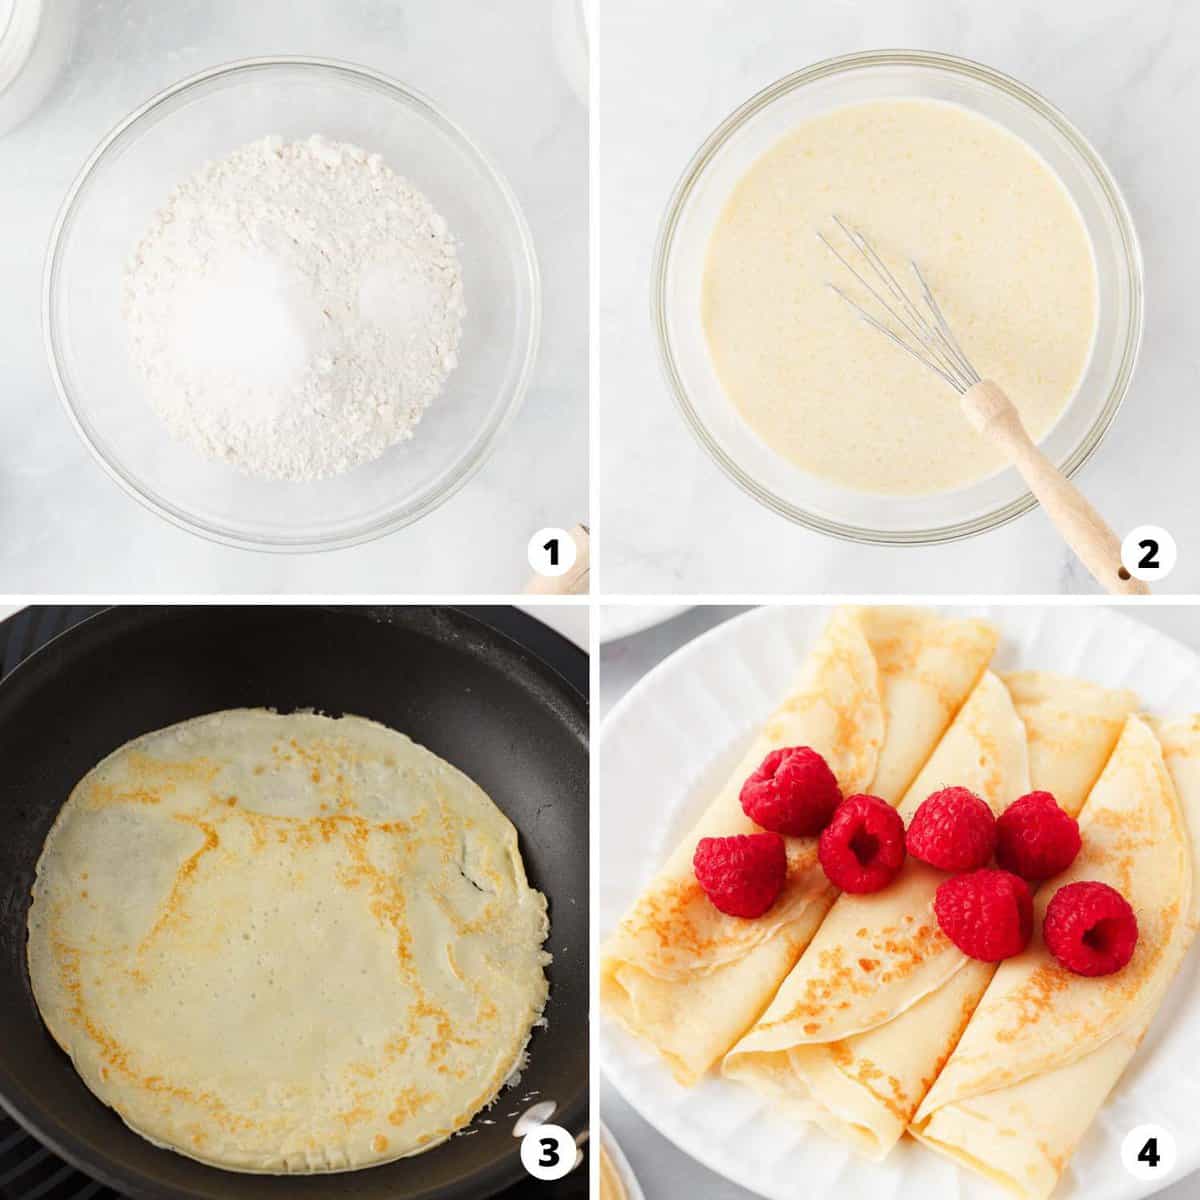 Showing how to make swedish pancakes in a 4 step collage.